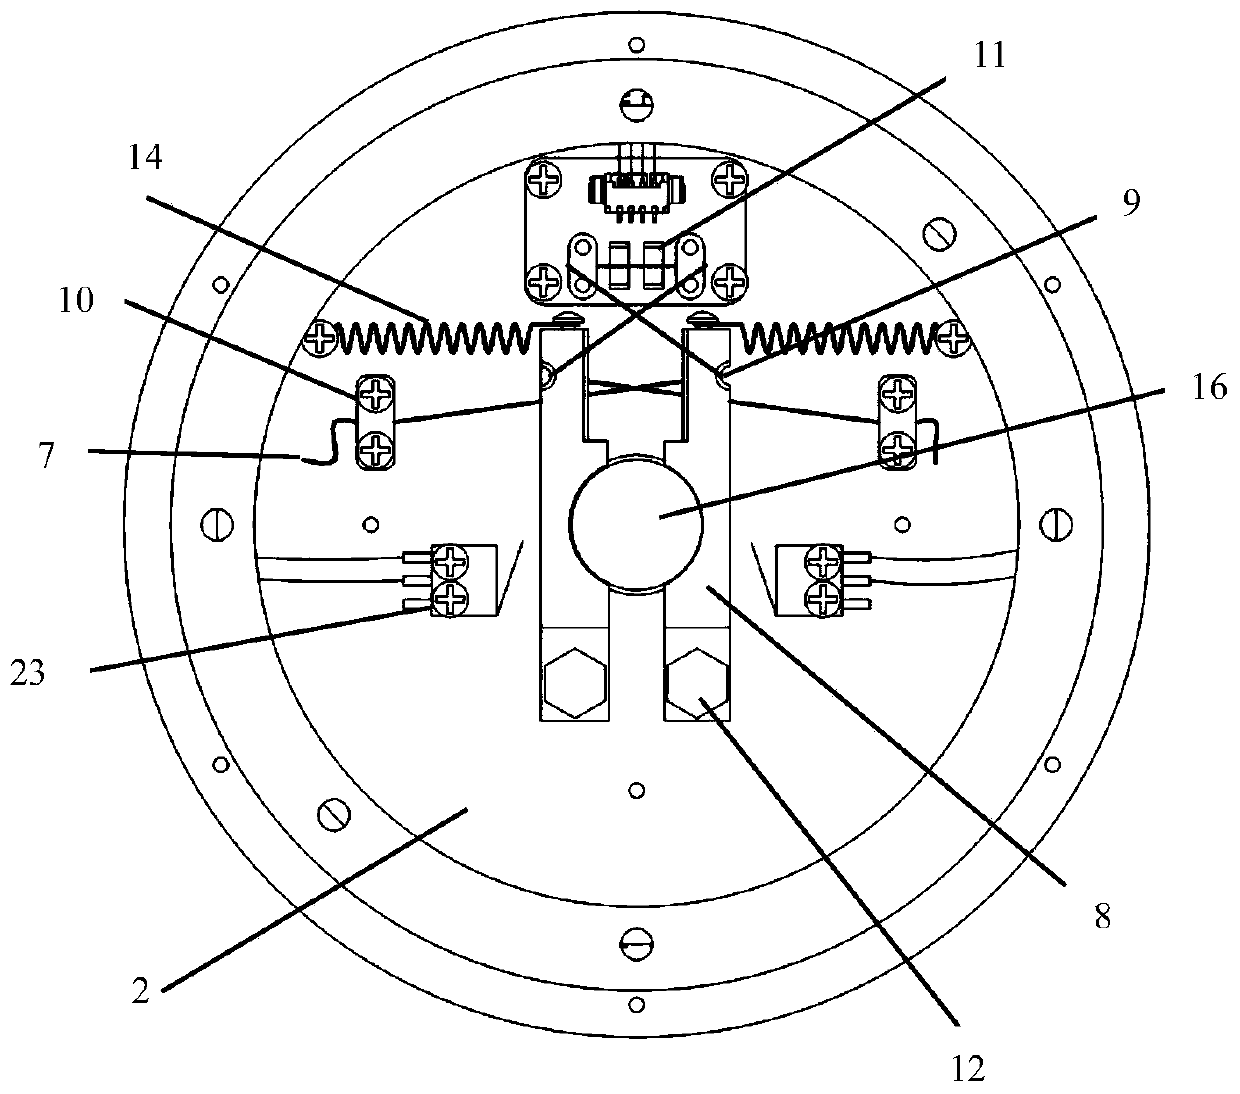 Power supply and control circuit applied to CubeSat brake sail